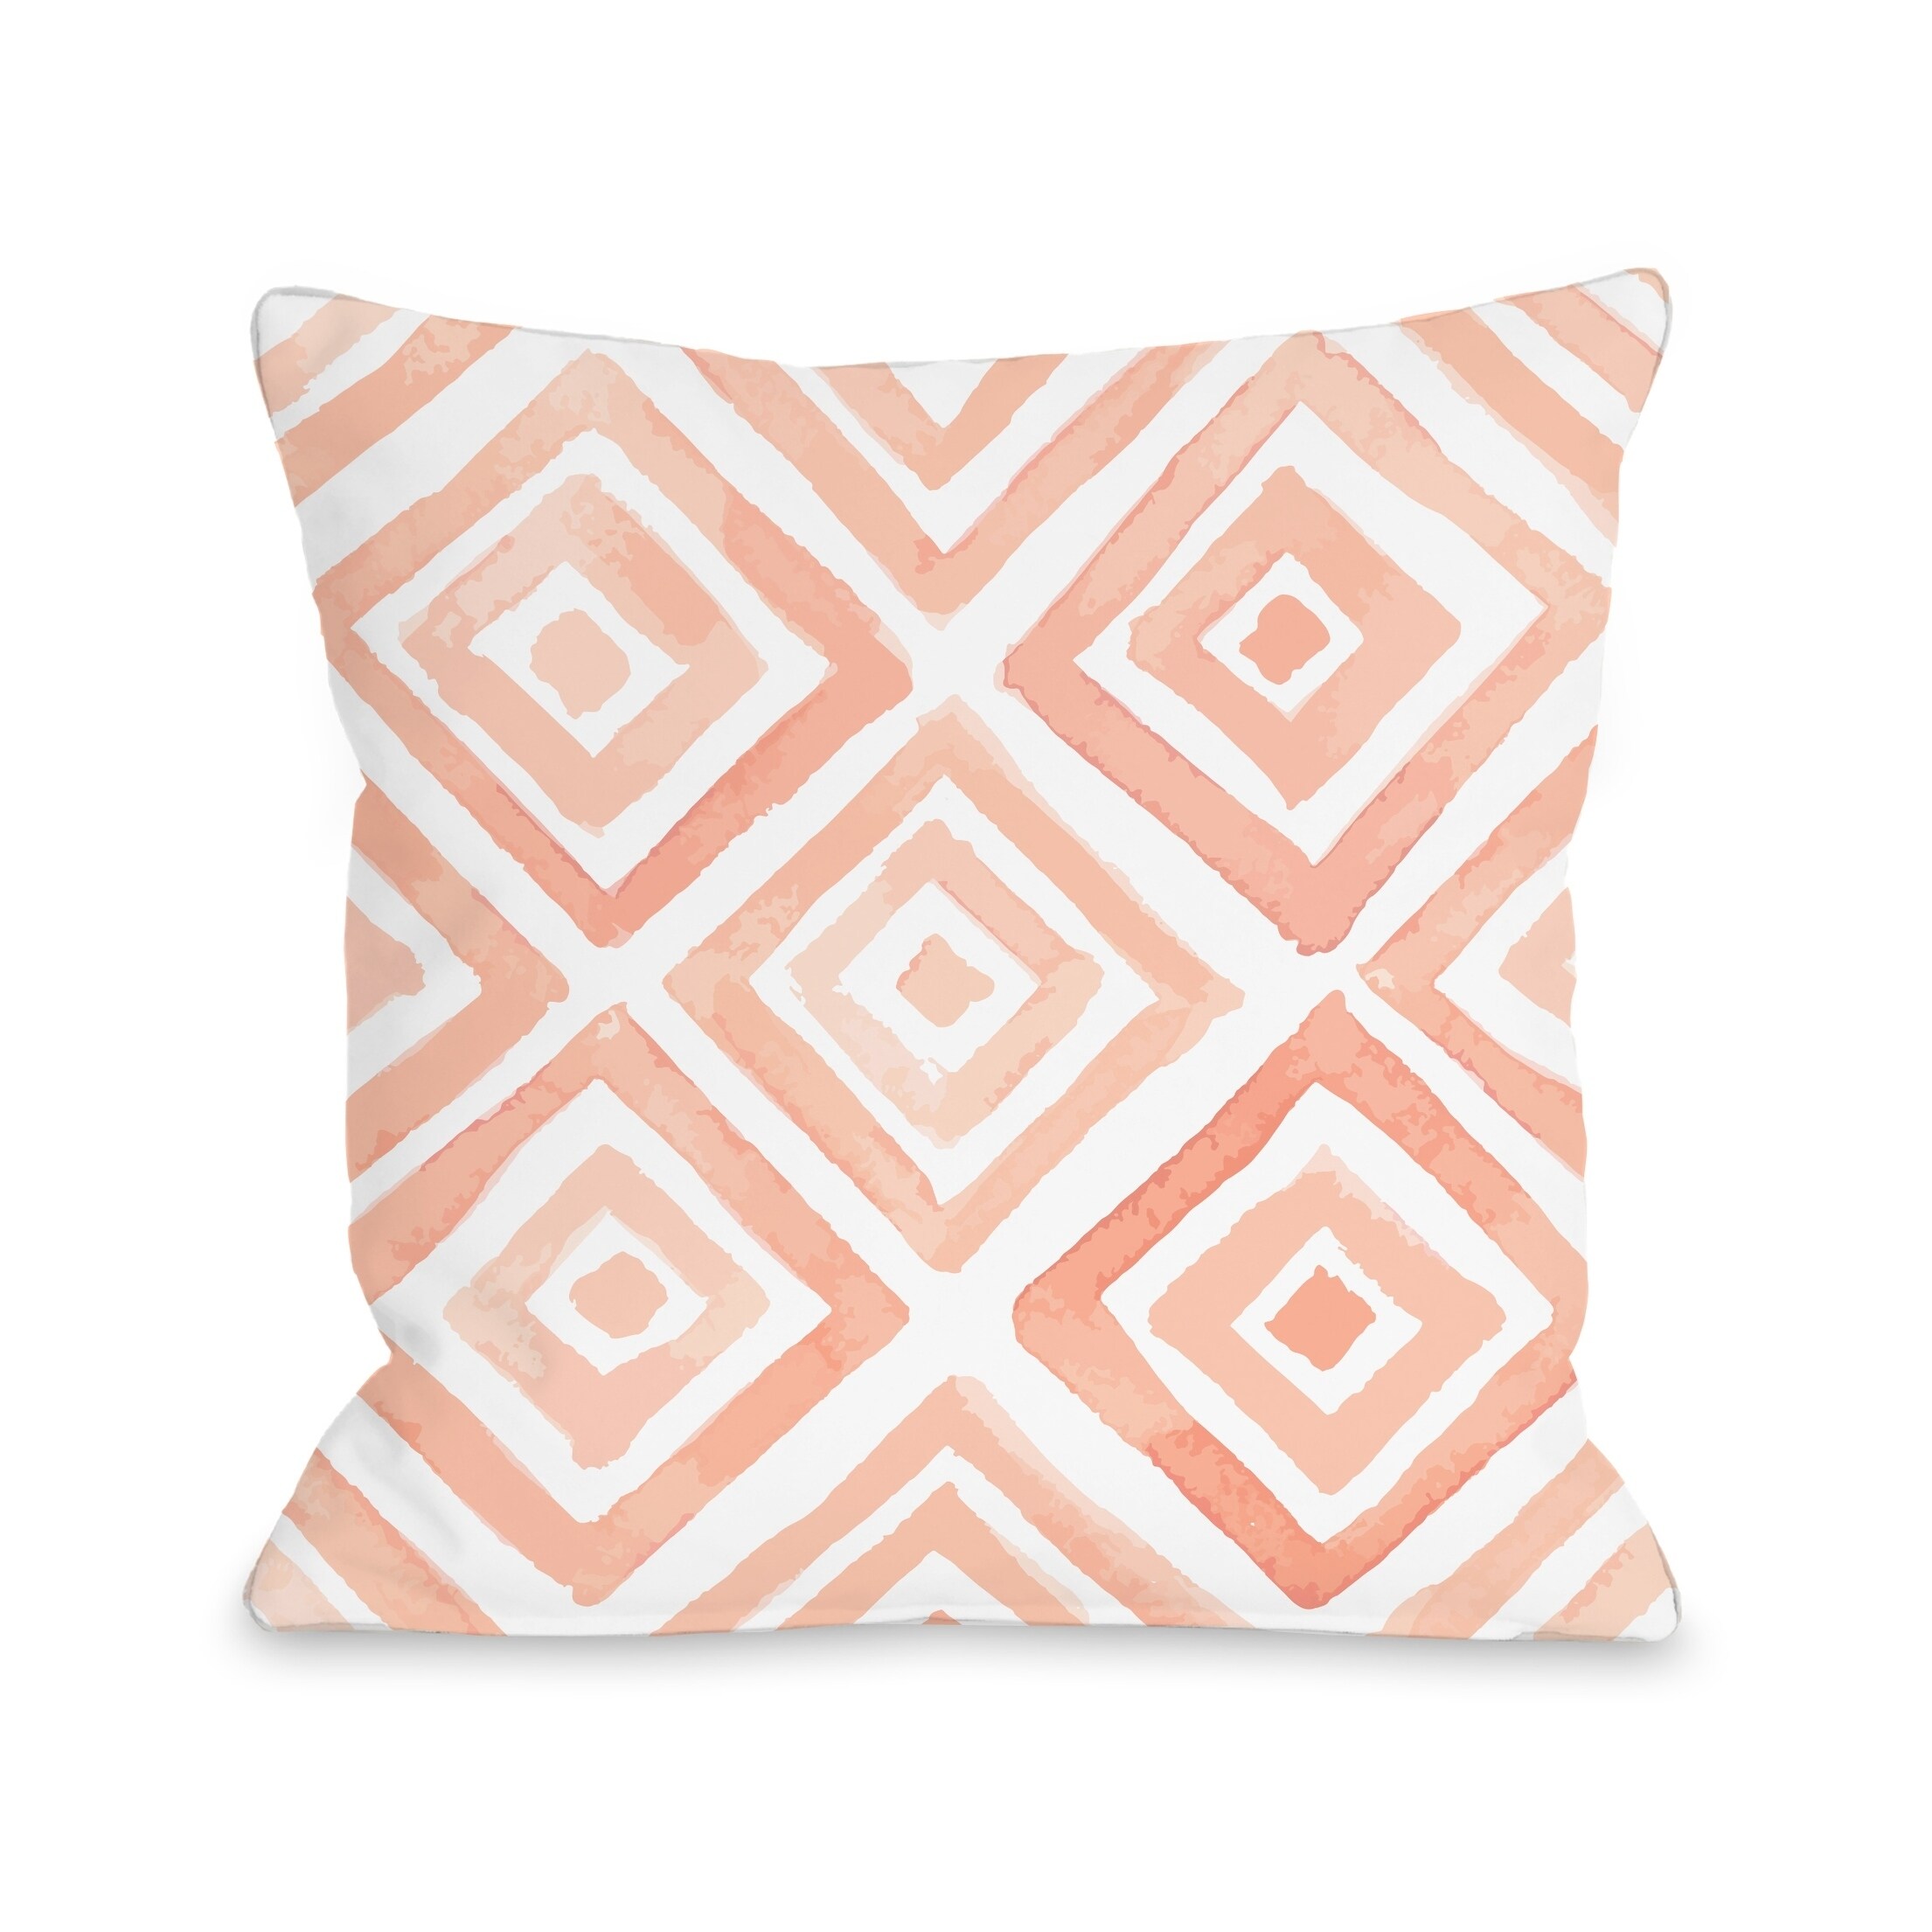 Orange/Brick Red 18x 18 One Bella Casa Texas State Type Throw Pillow by OBC